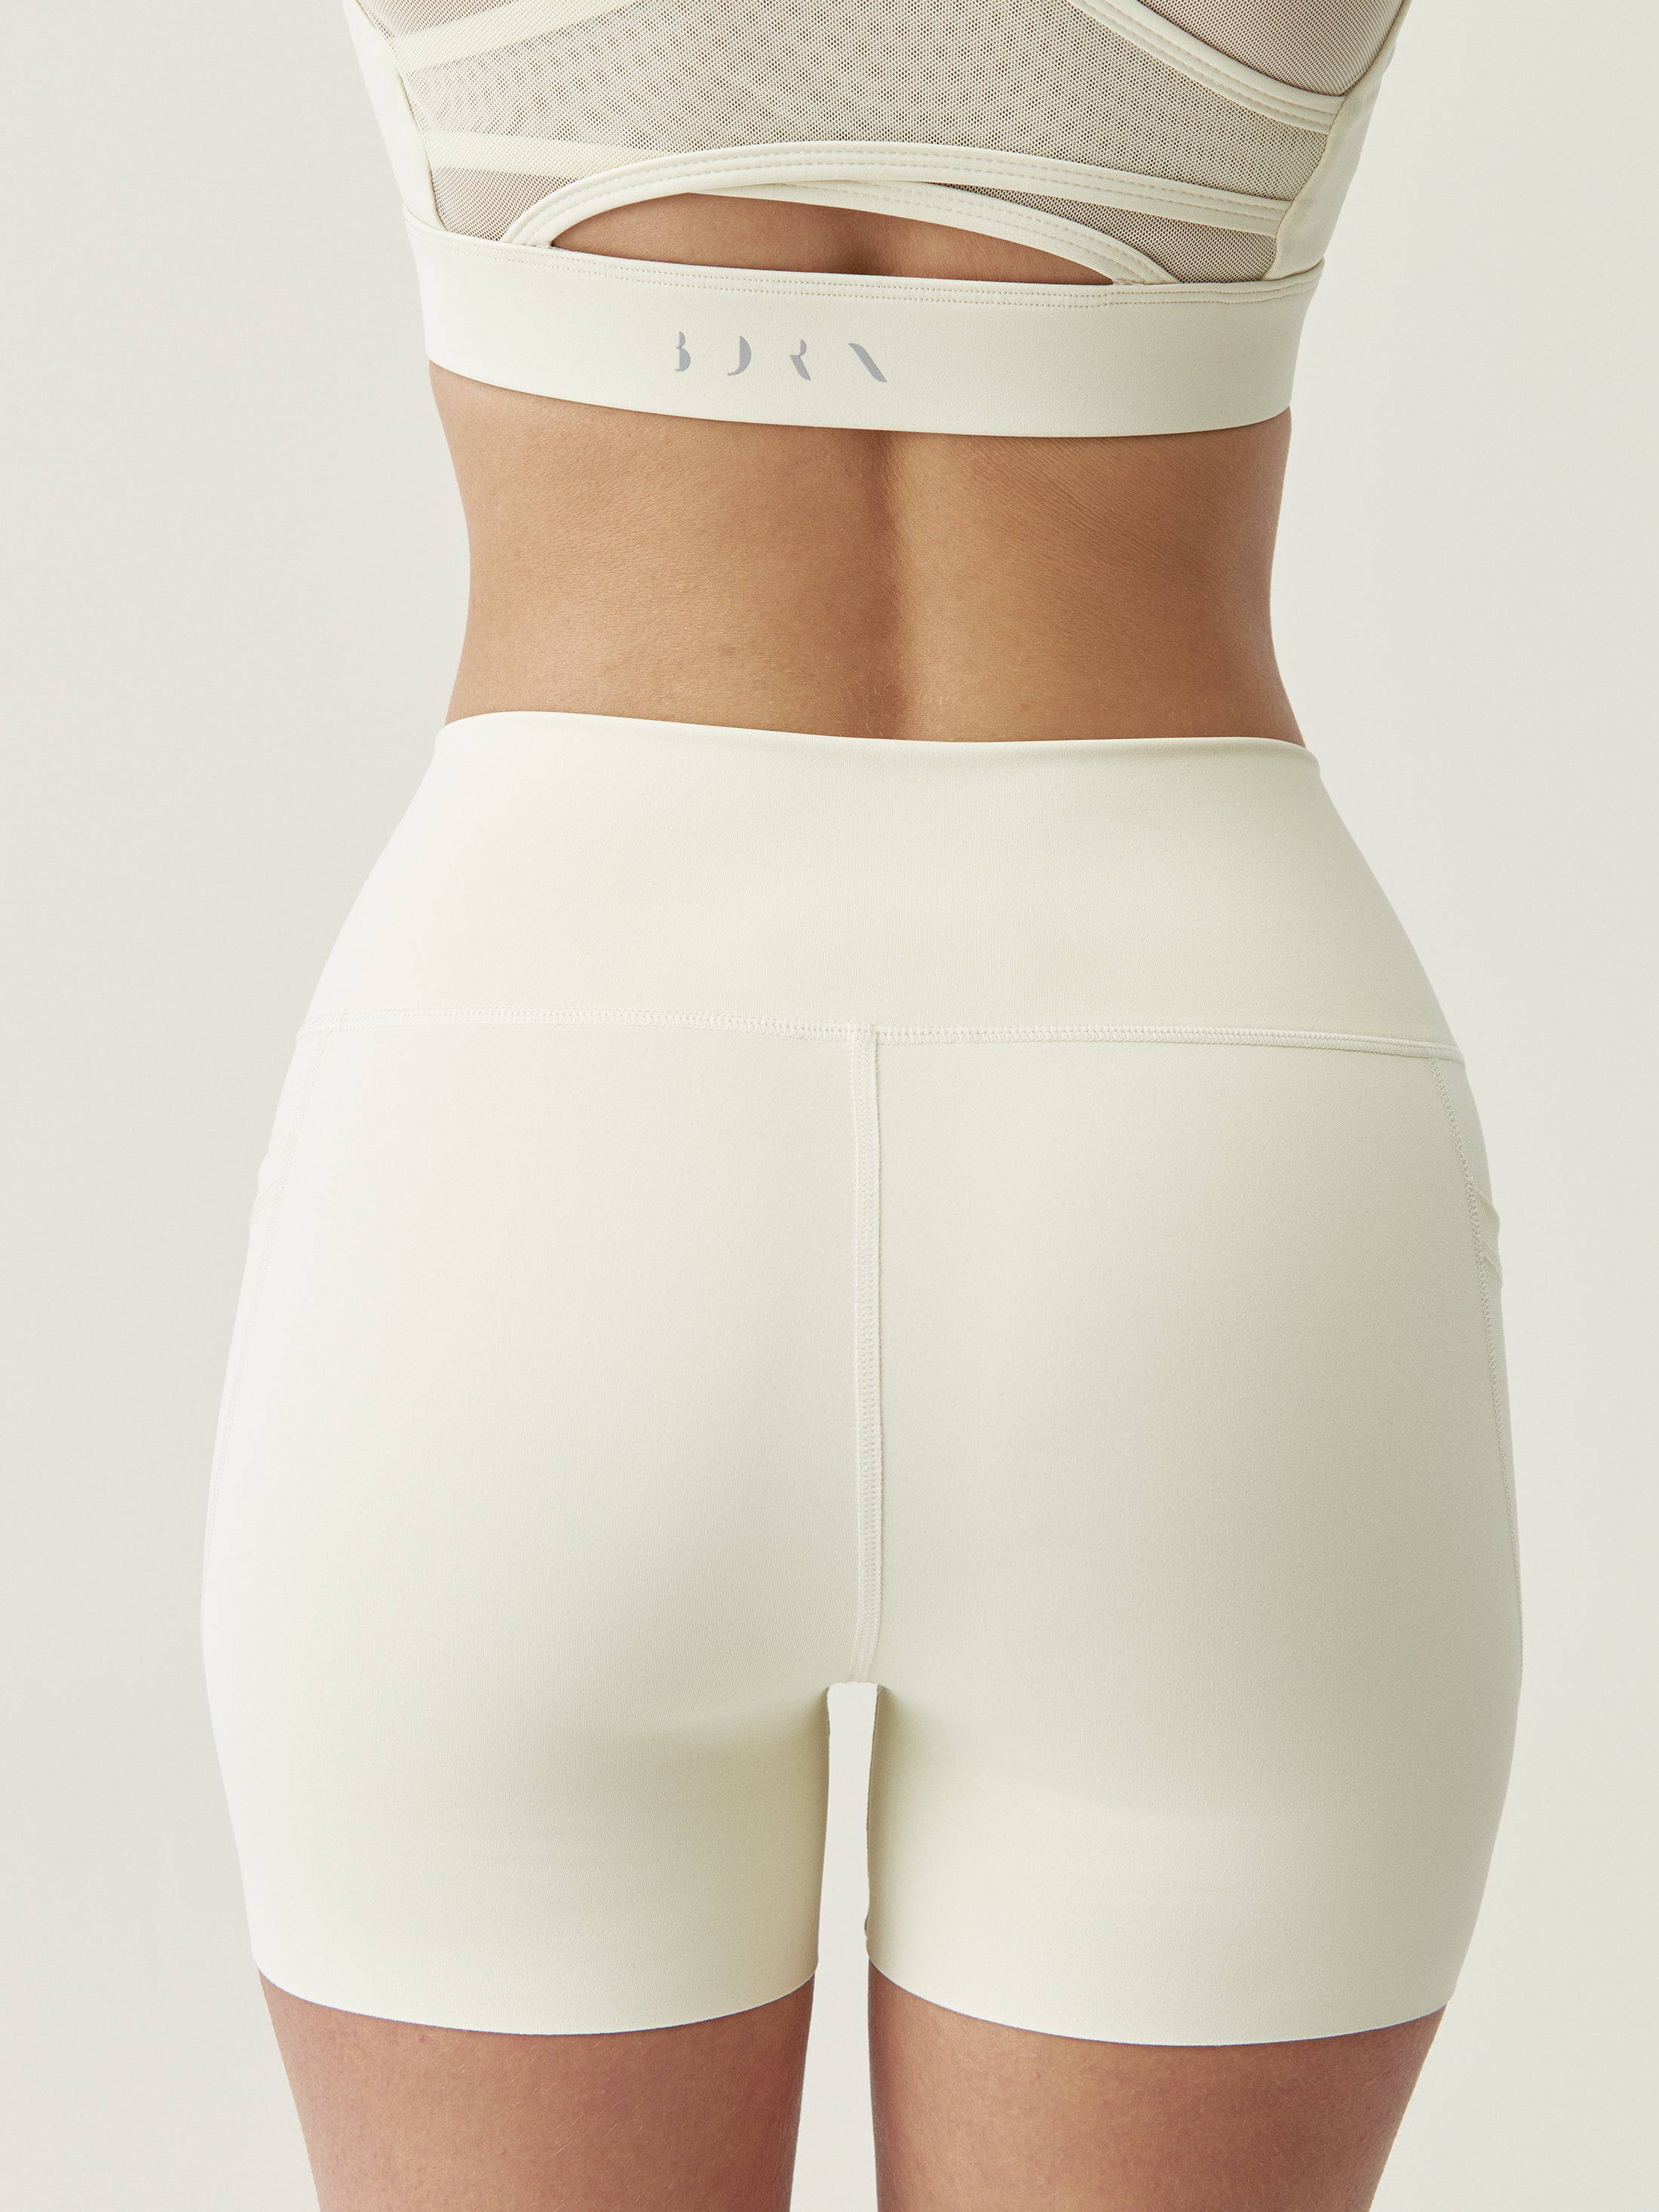 Raw Shorts in Ivory